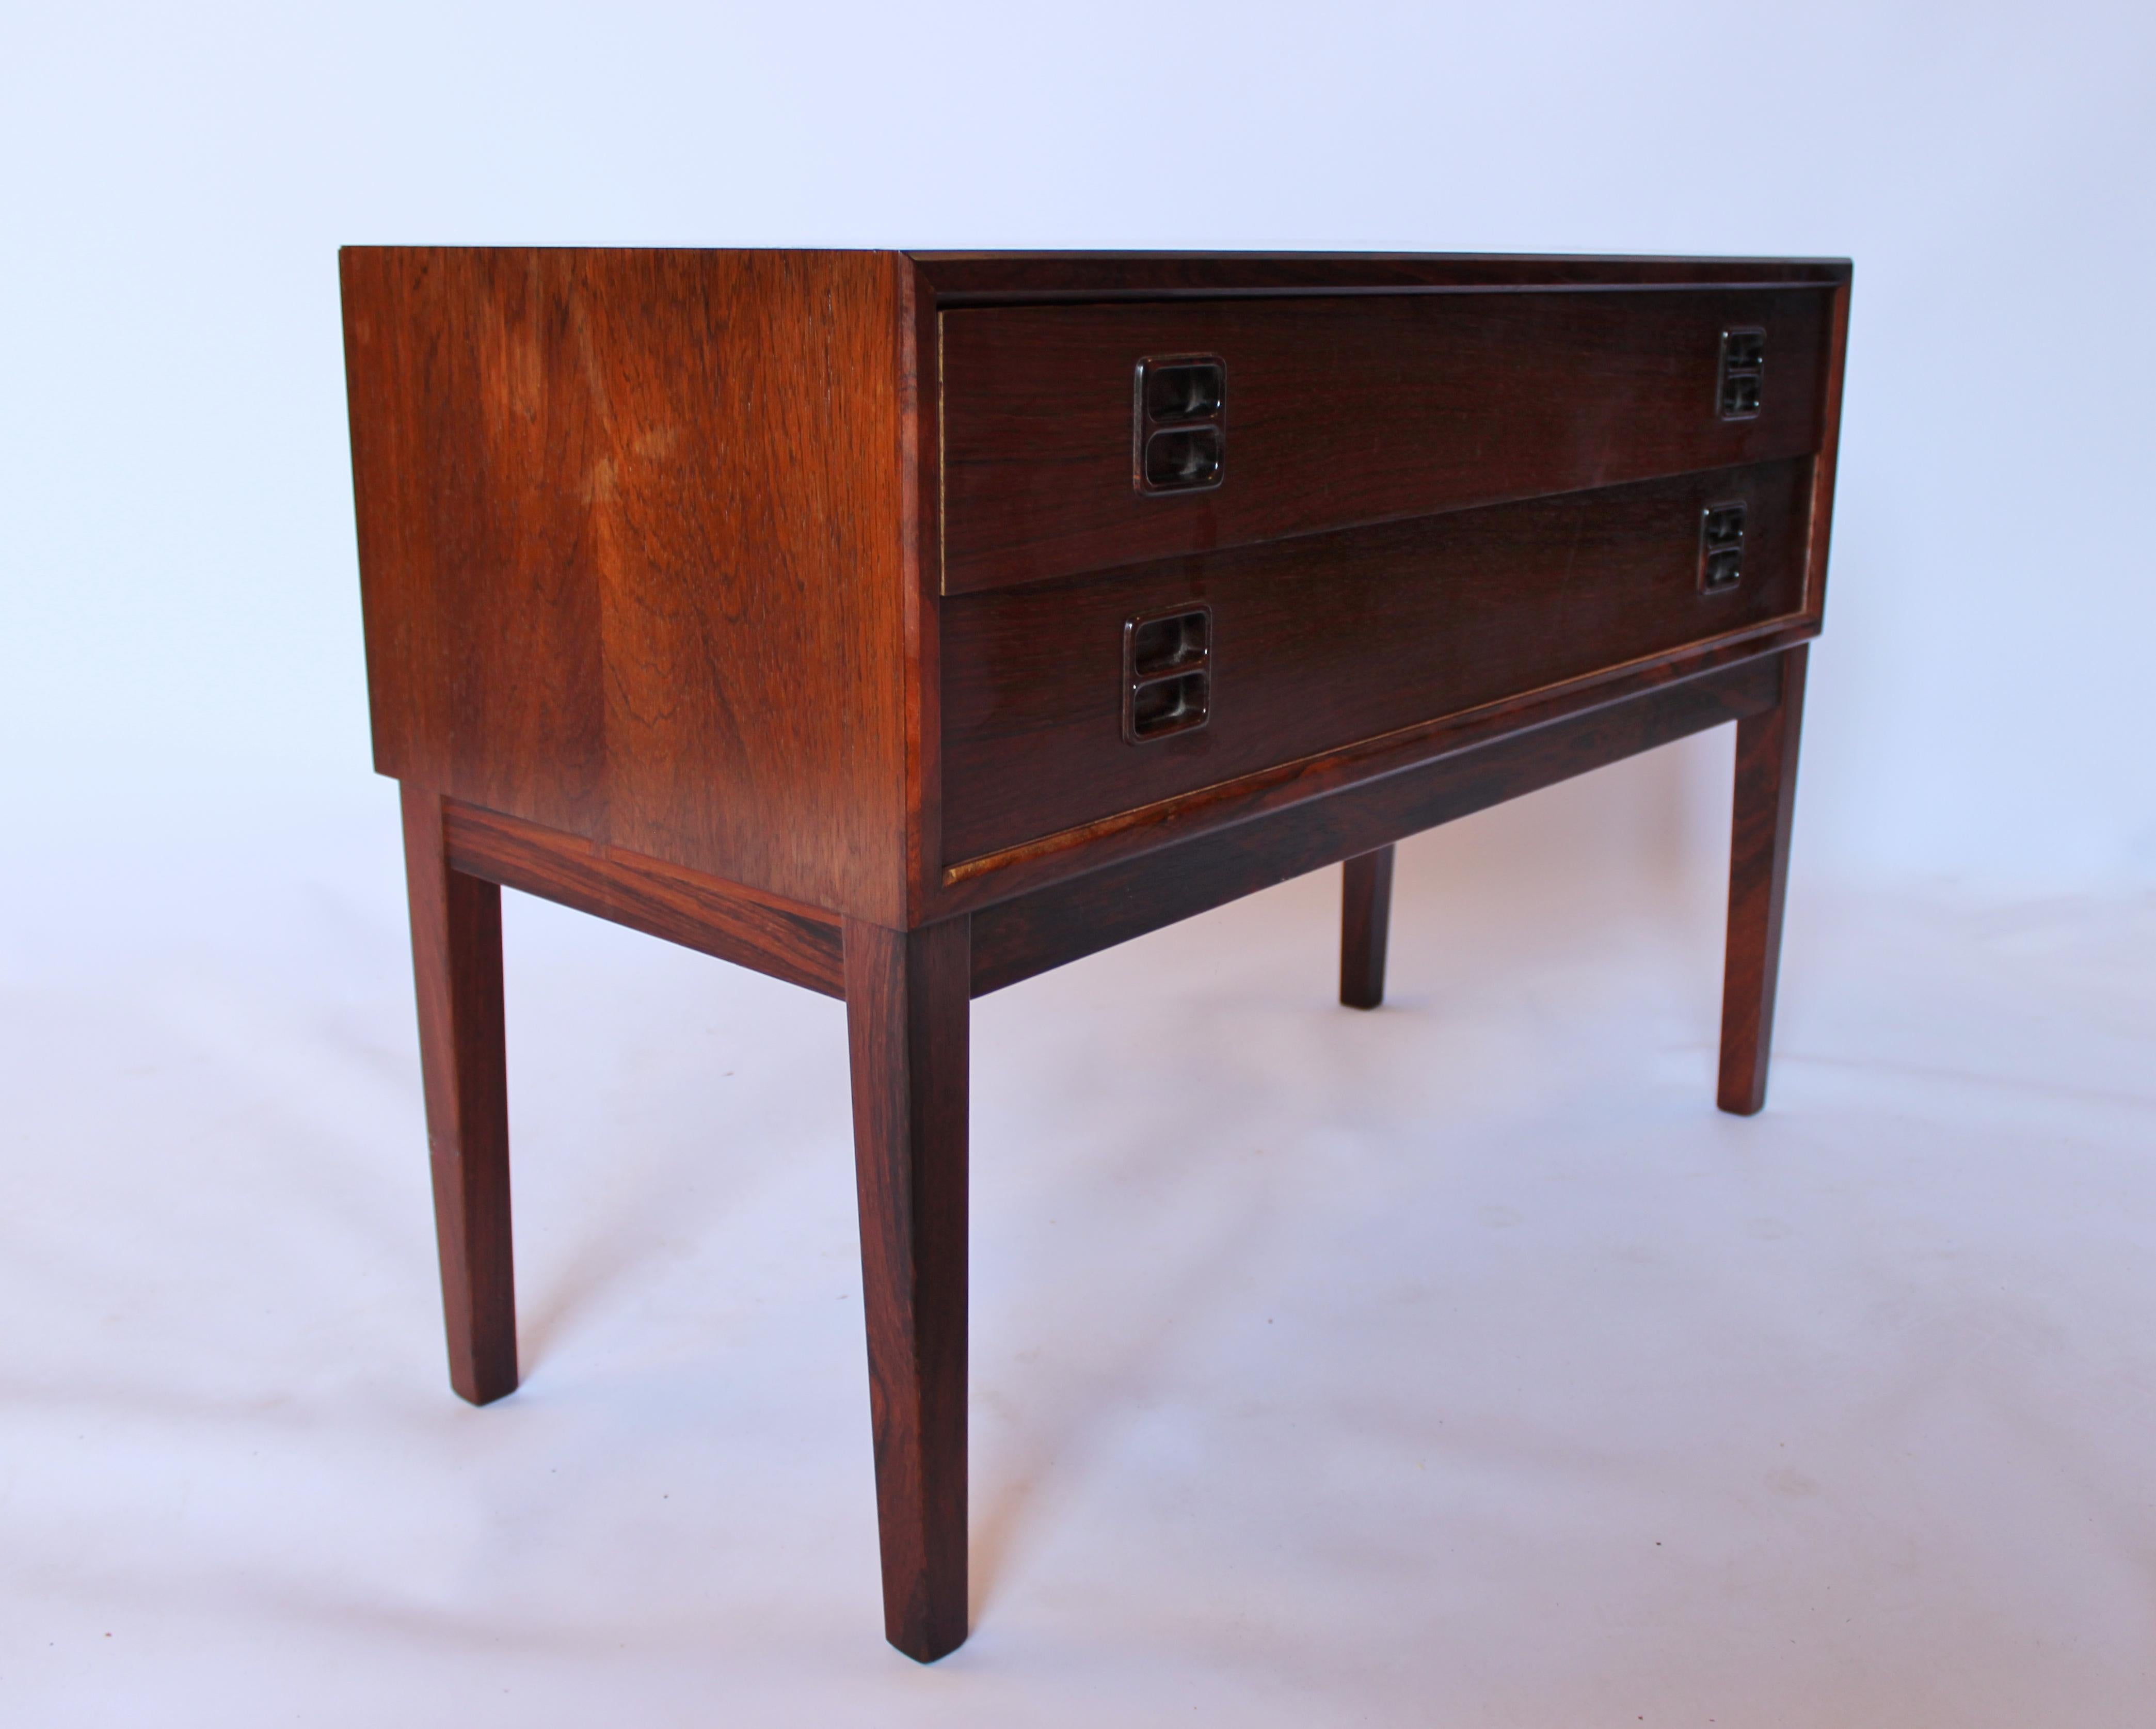 The smaller dresser with two drawers in rosewood, featuring Danish design from the 1960s, is a delightful and practical piece of mid-century furniture.

Danish design from the 1960s is celebrated for its clean lines, functional aesthetics, and use